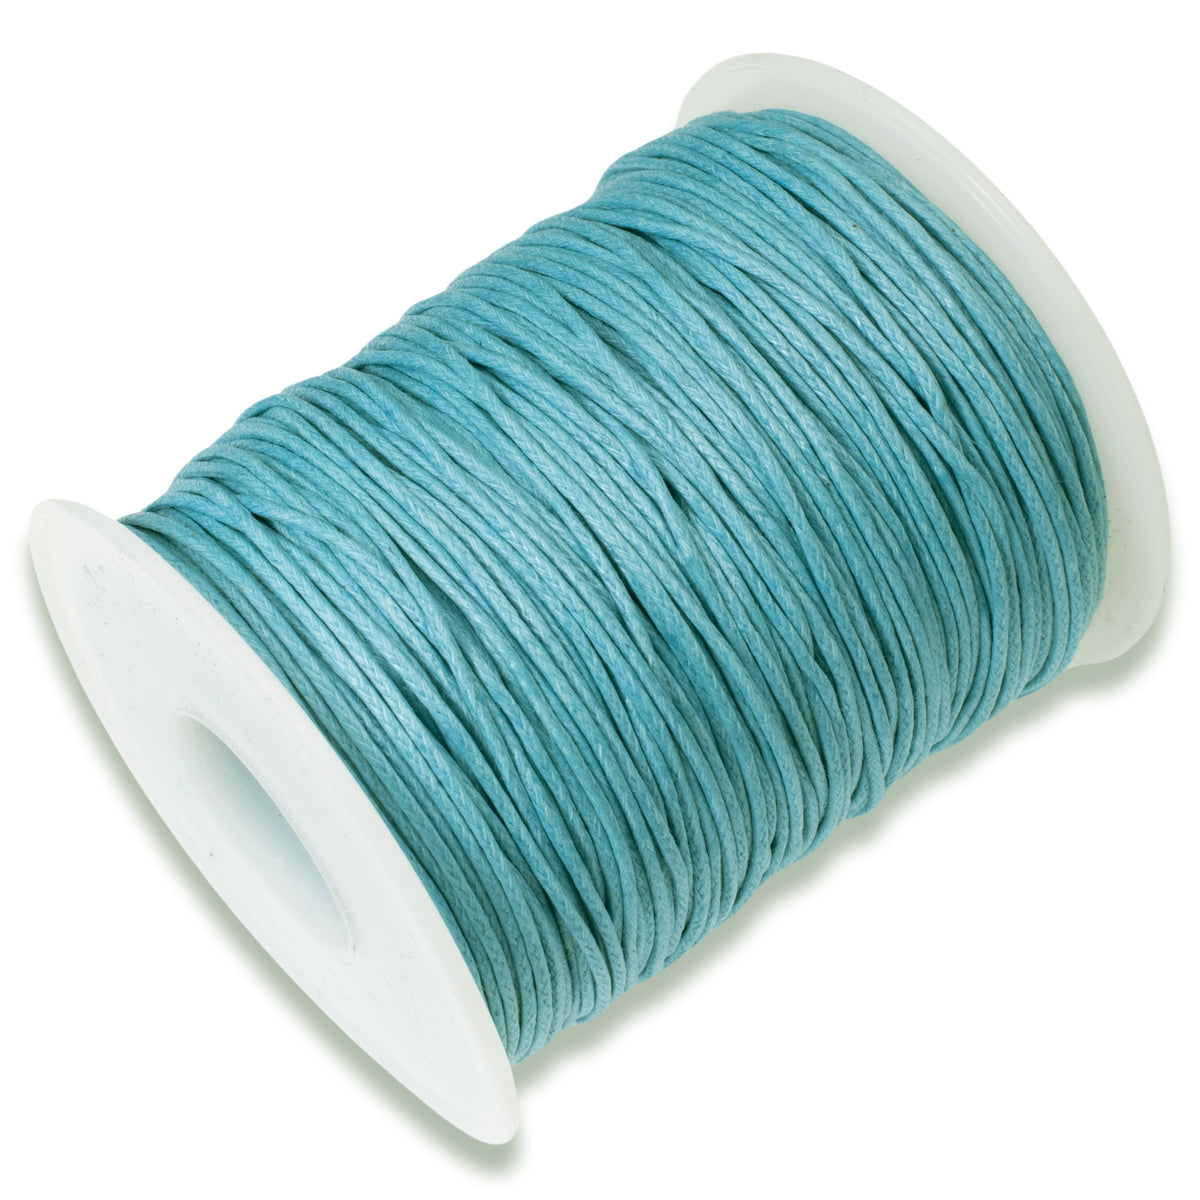 Hot Selling 1mm Waxed Cotton Cord 60m/lot Deep Blue Jewelry Cord